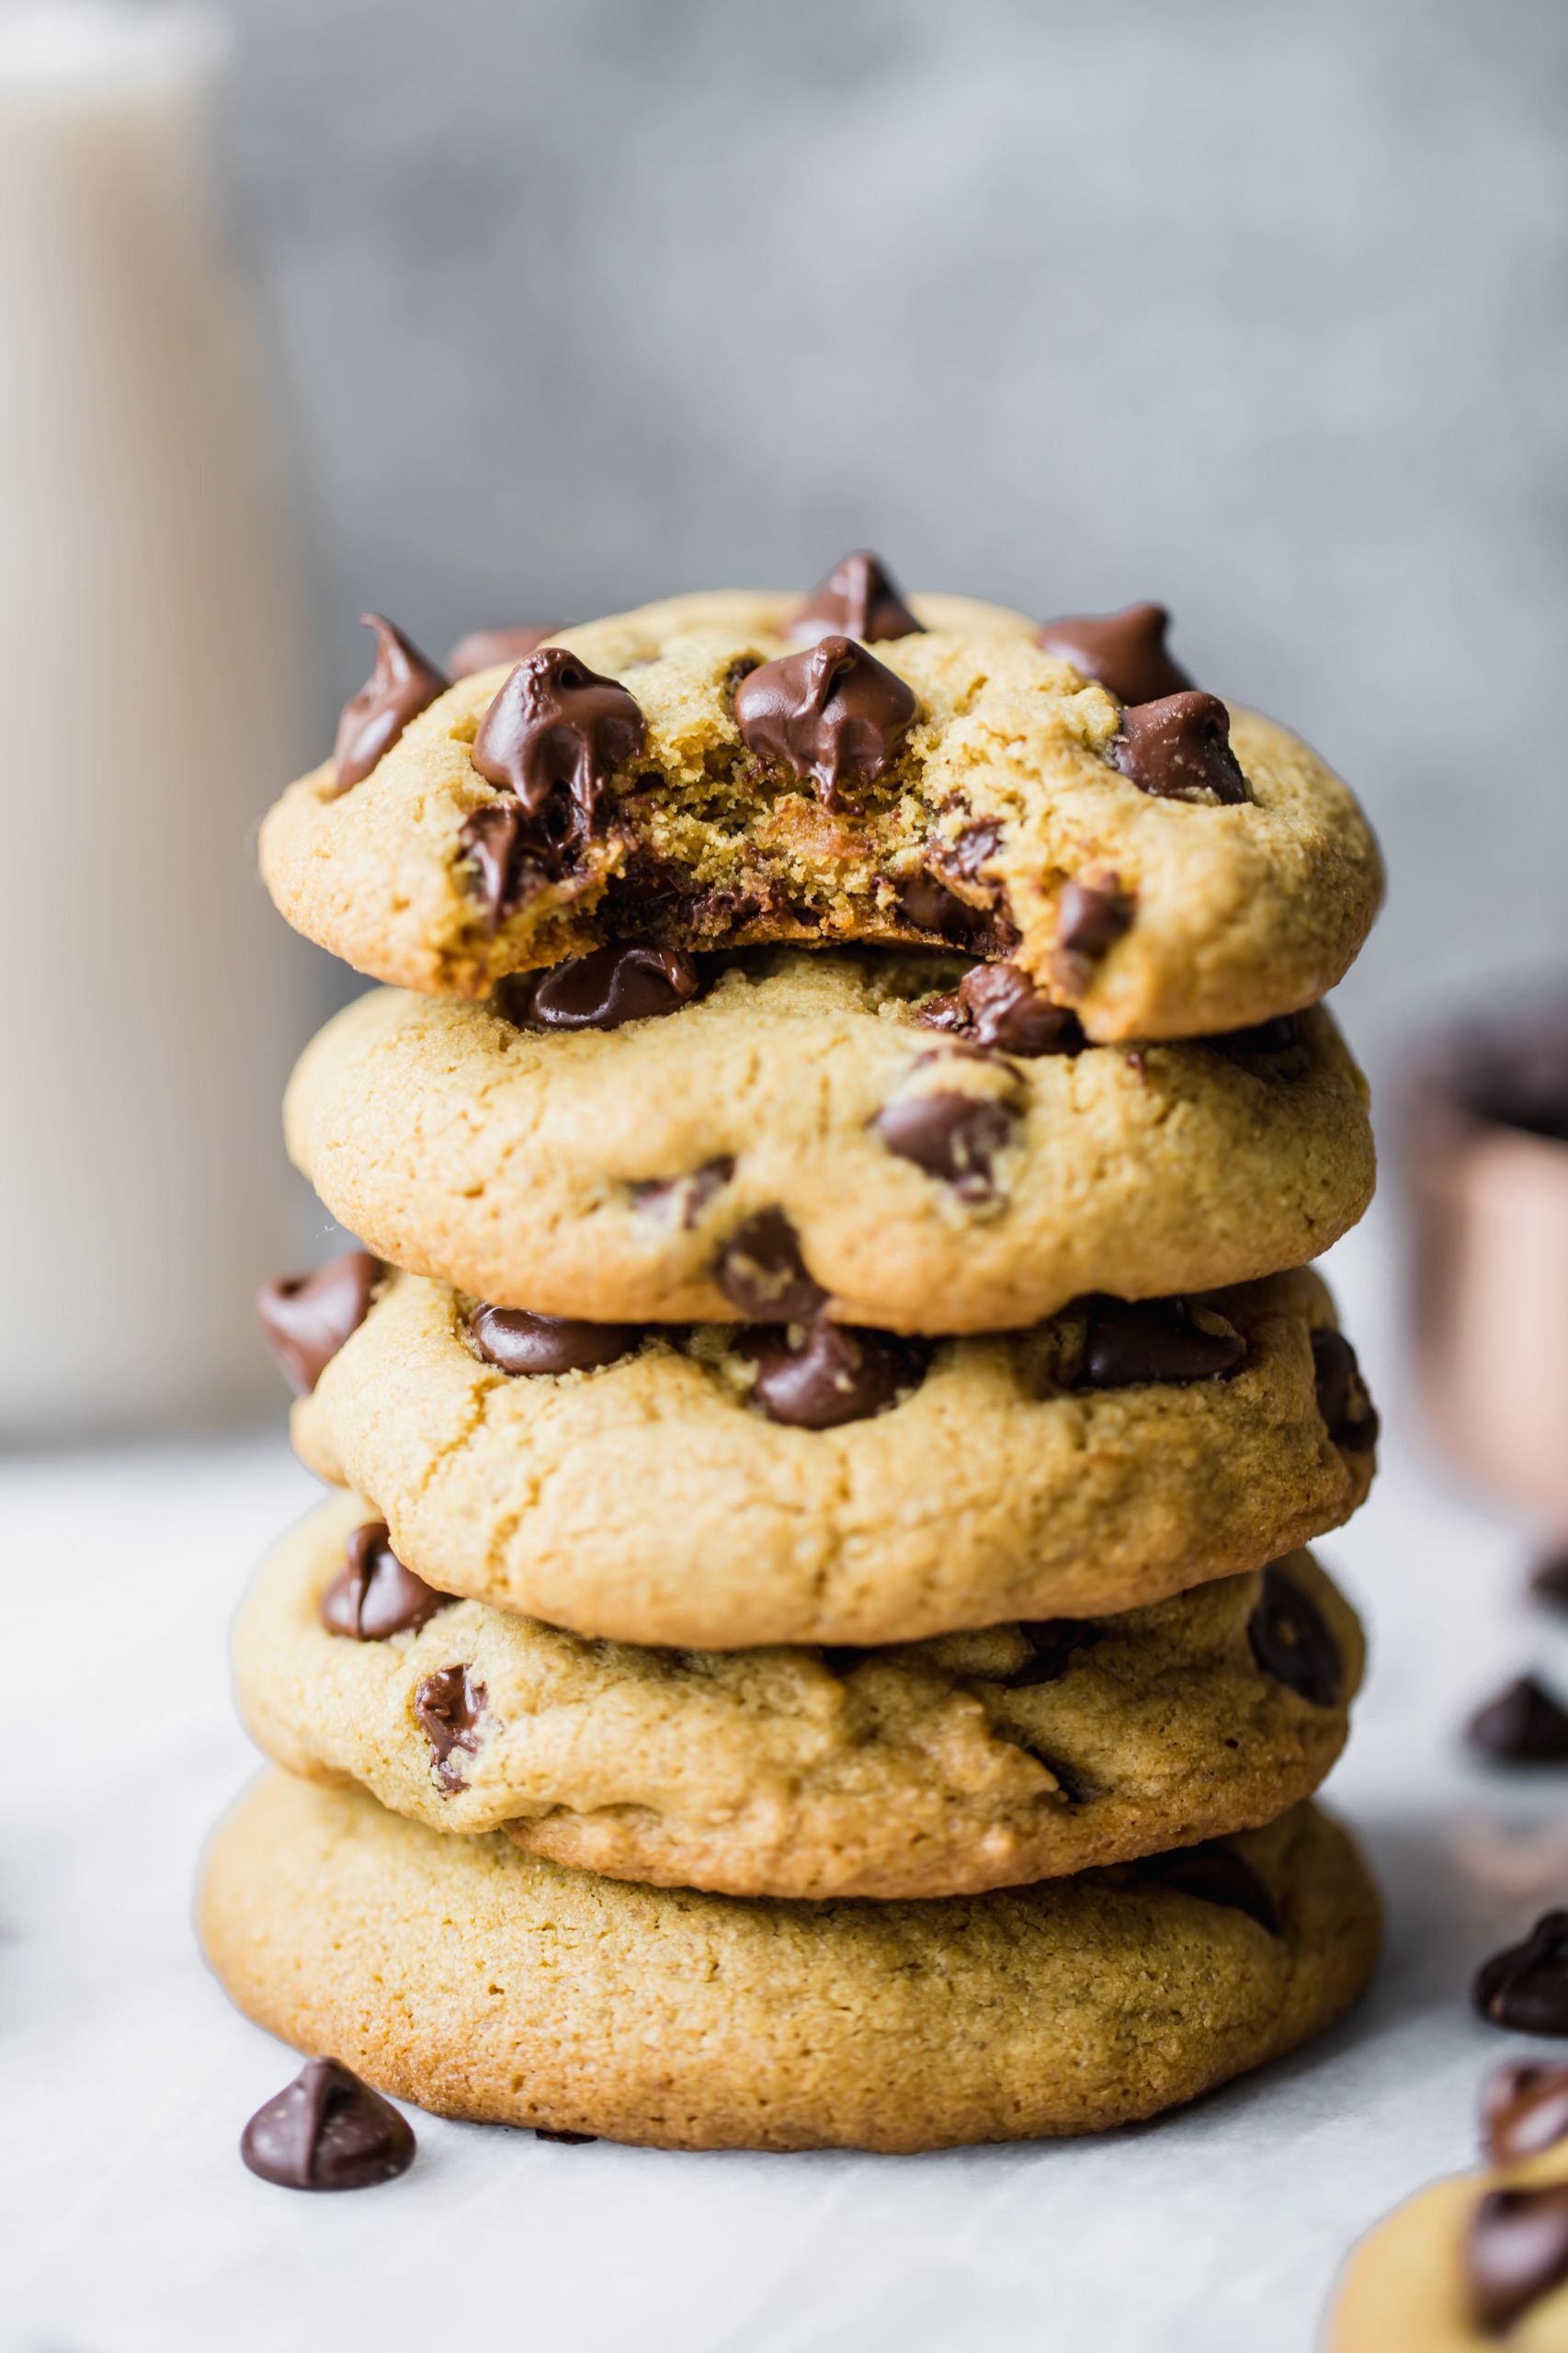 Best Gluten Free Cookie Recipes
 The Best Gluten Free Chocolate Chip Cookies You ll Ever